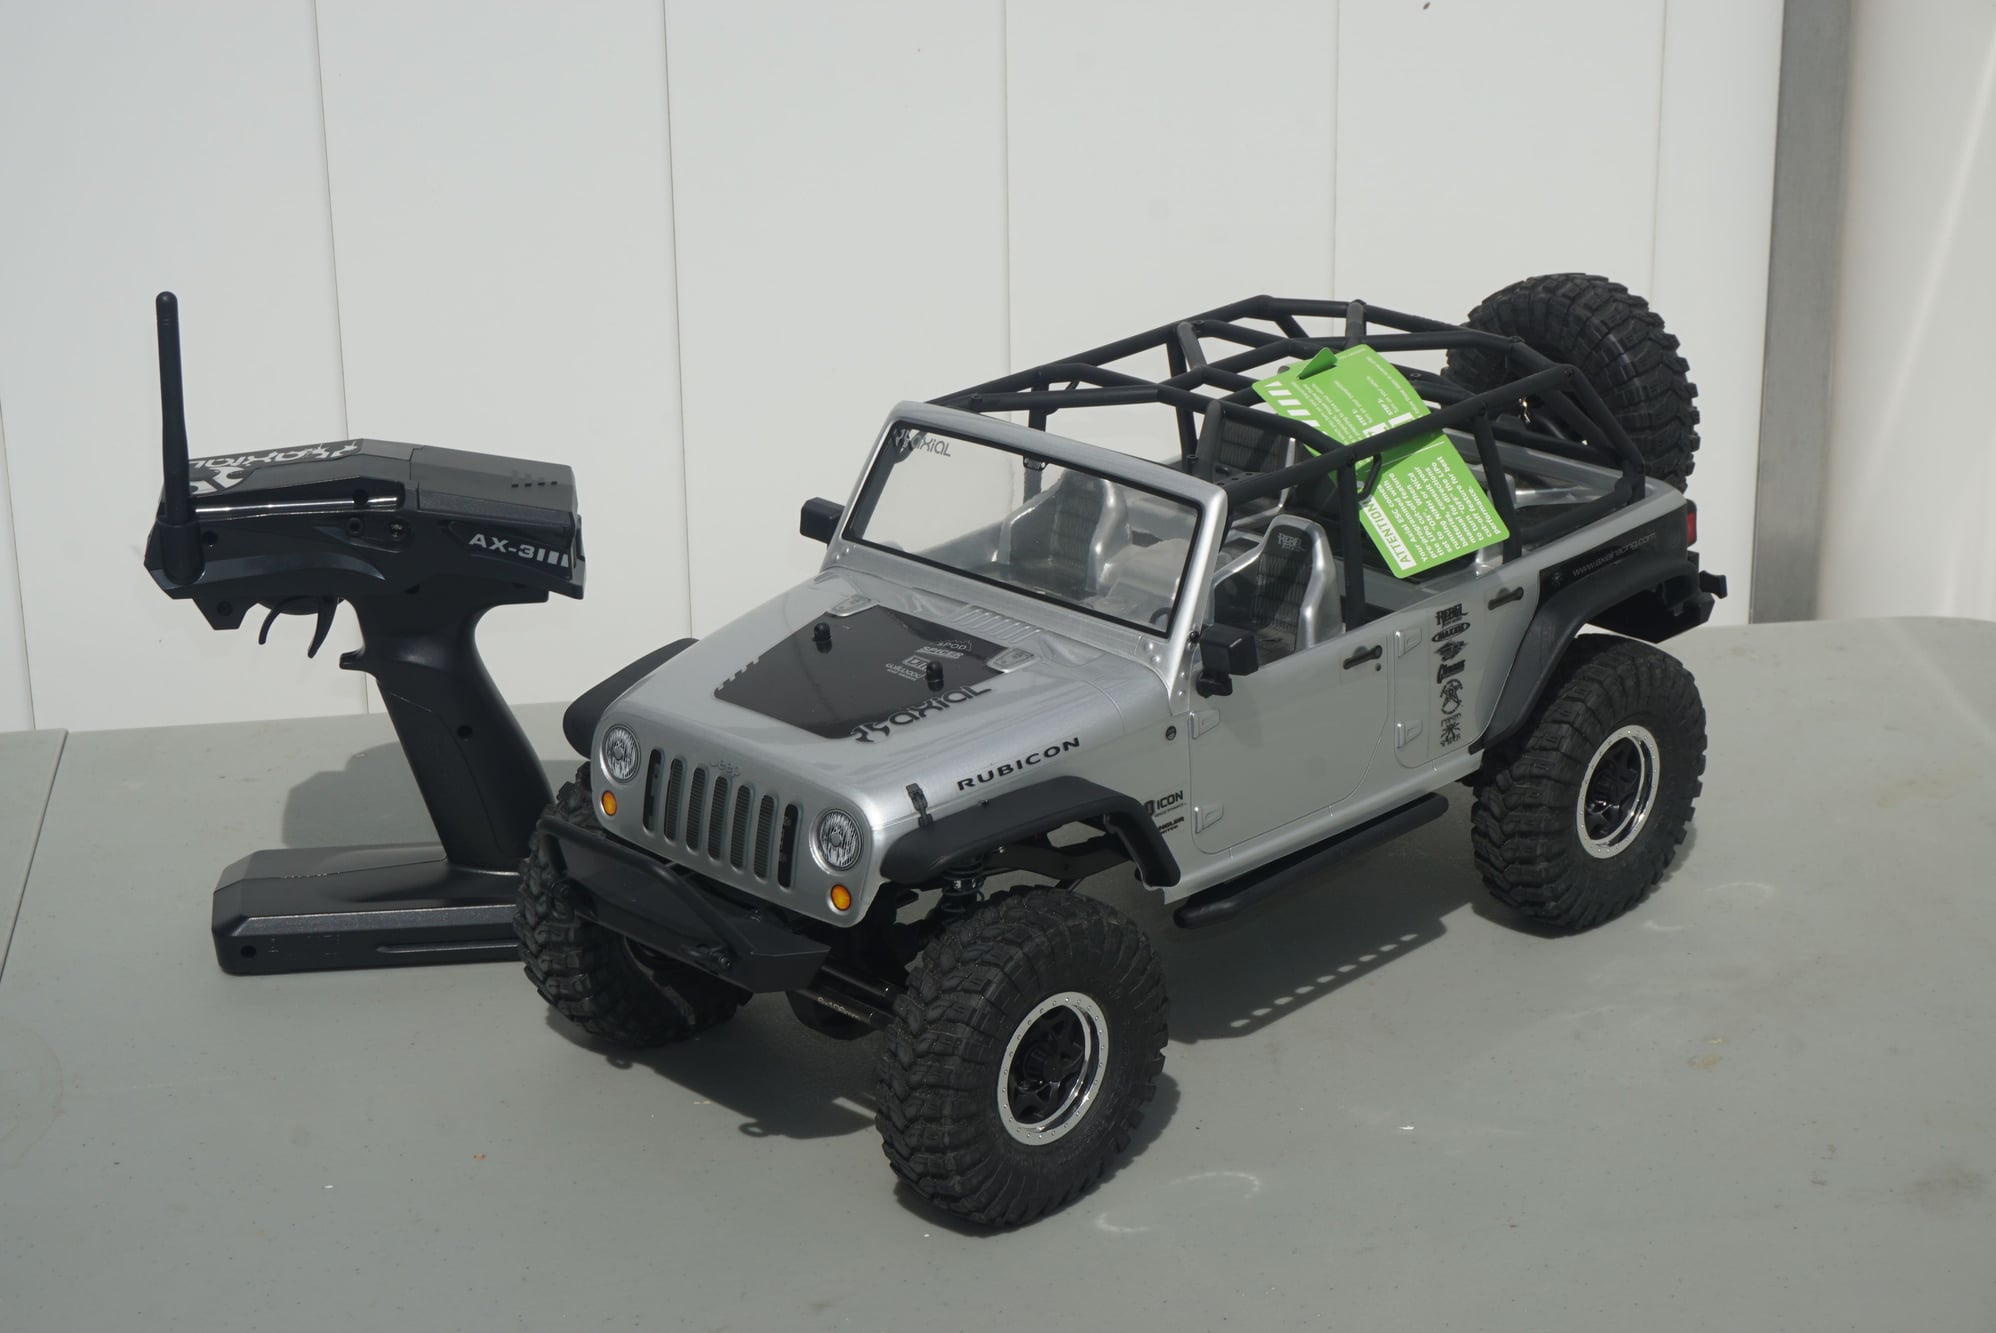 Axial SCX10 2012 Jeep Wrangler Unlimited Rubicon Manual Kit Version AX90027